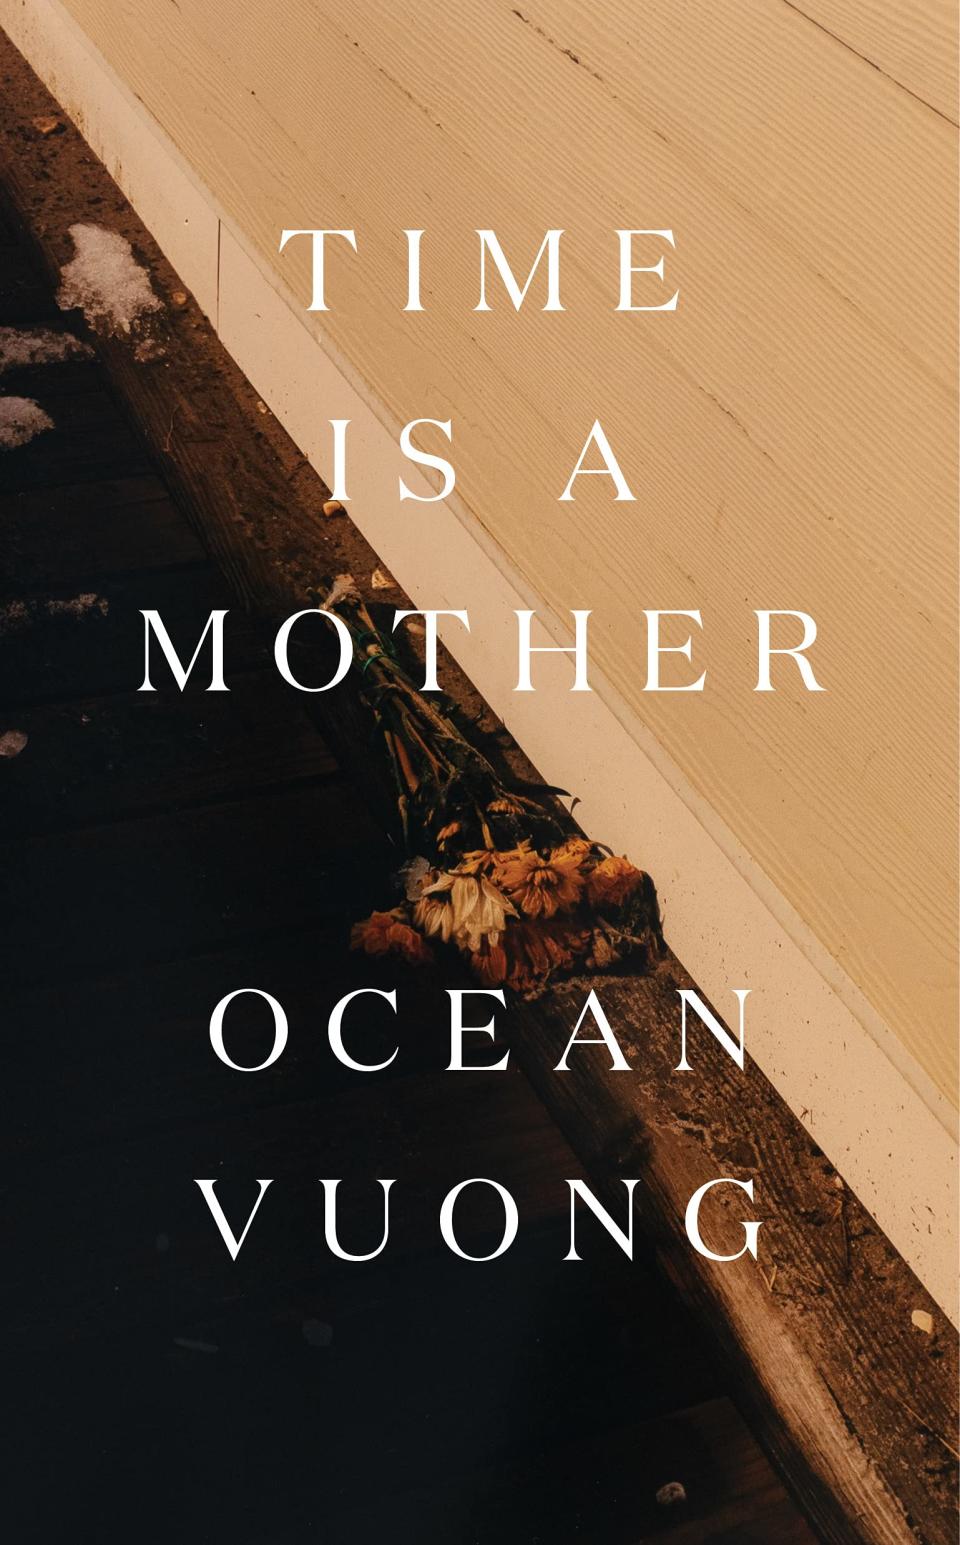 "Time Is a Mother" by Ocean Vuong